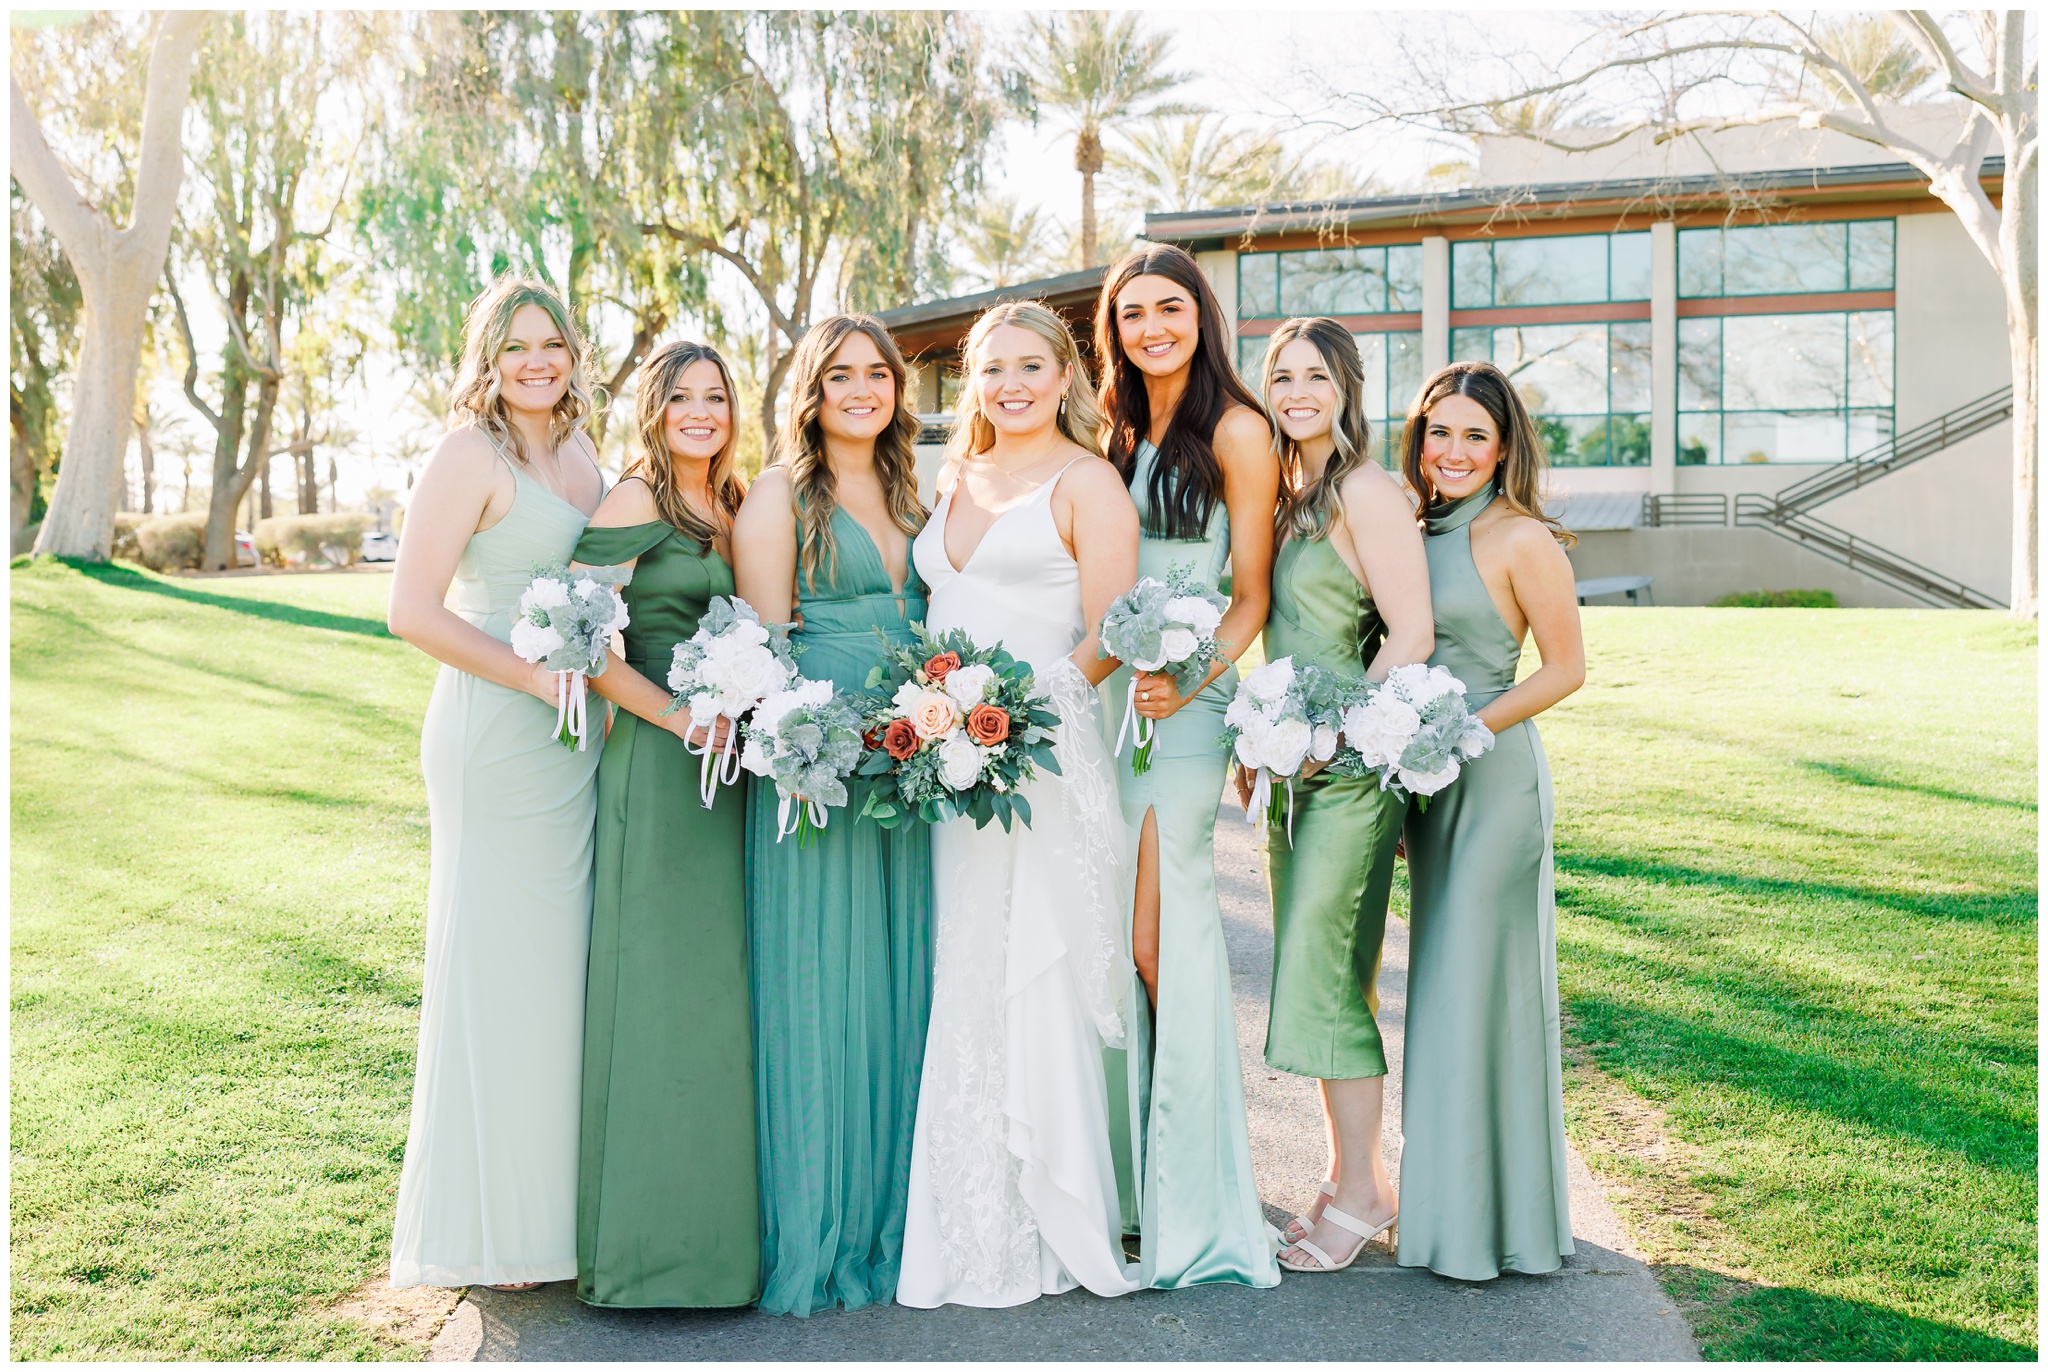 Bridesmaids in different shades of green dresses